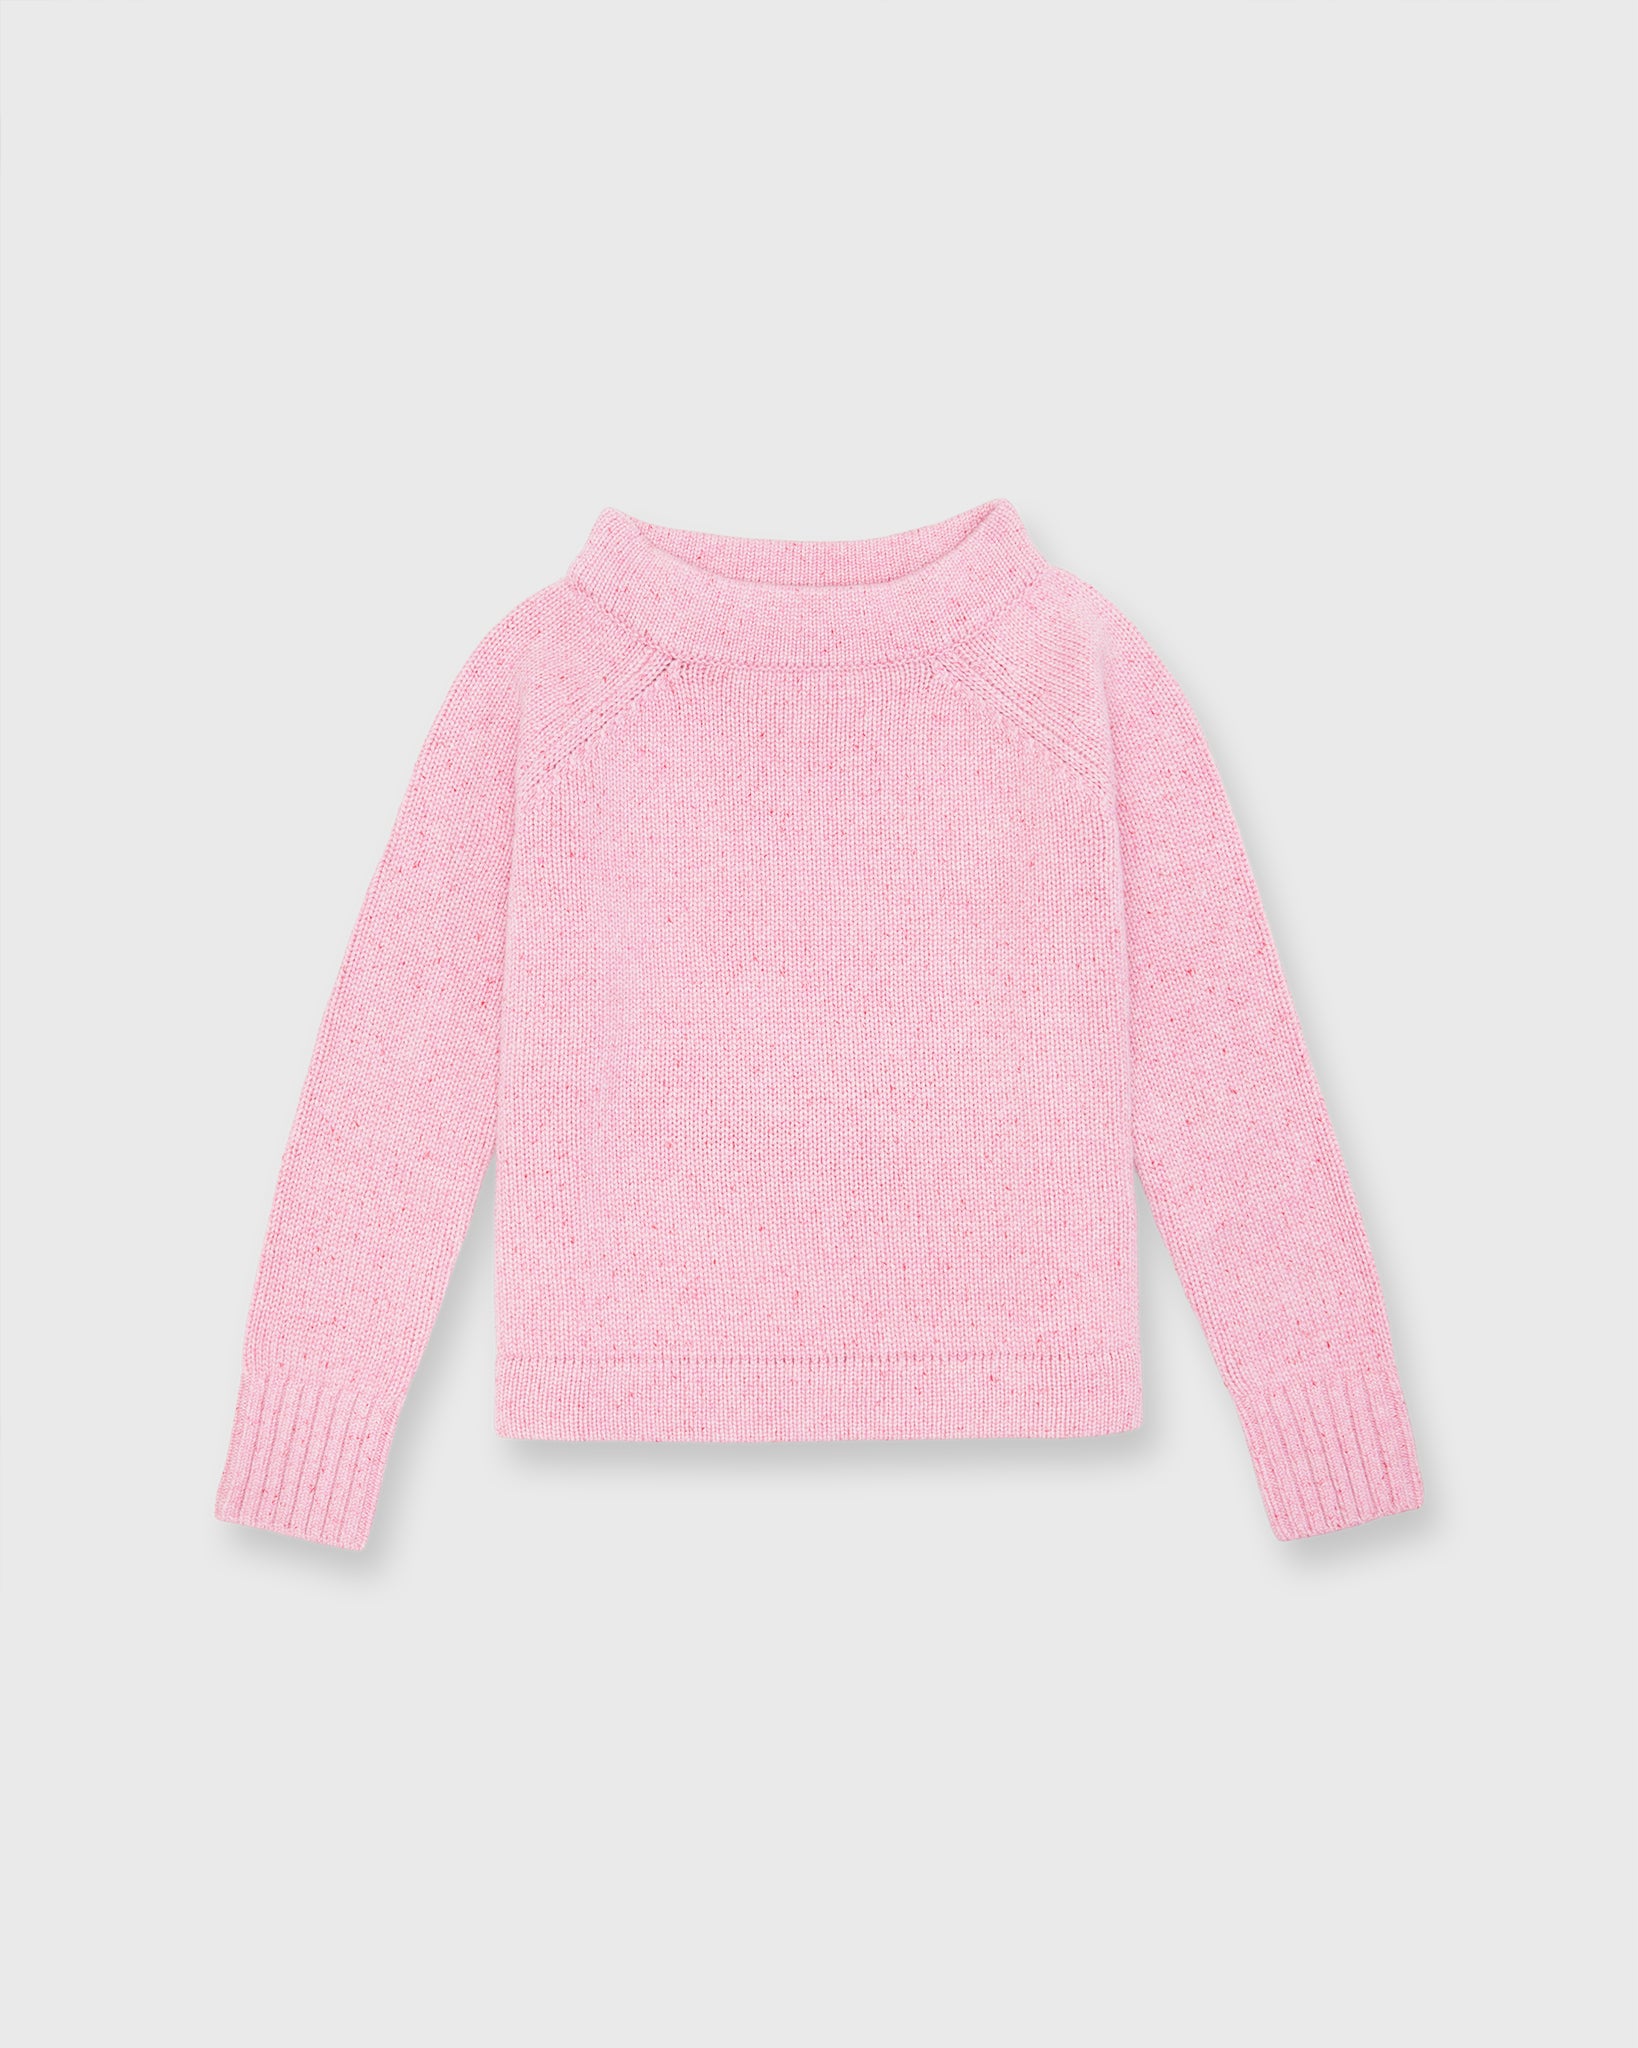 Mashburn in Sweater Cashmere Shop Golightly Pink Ann | Donegal